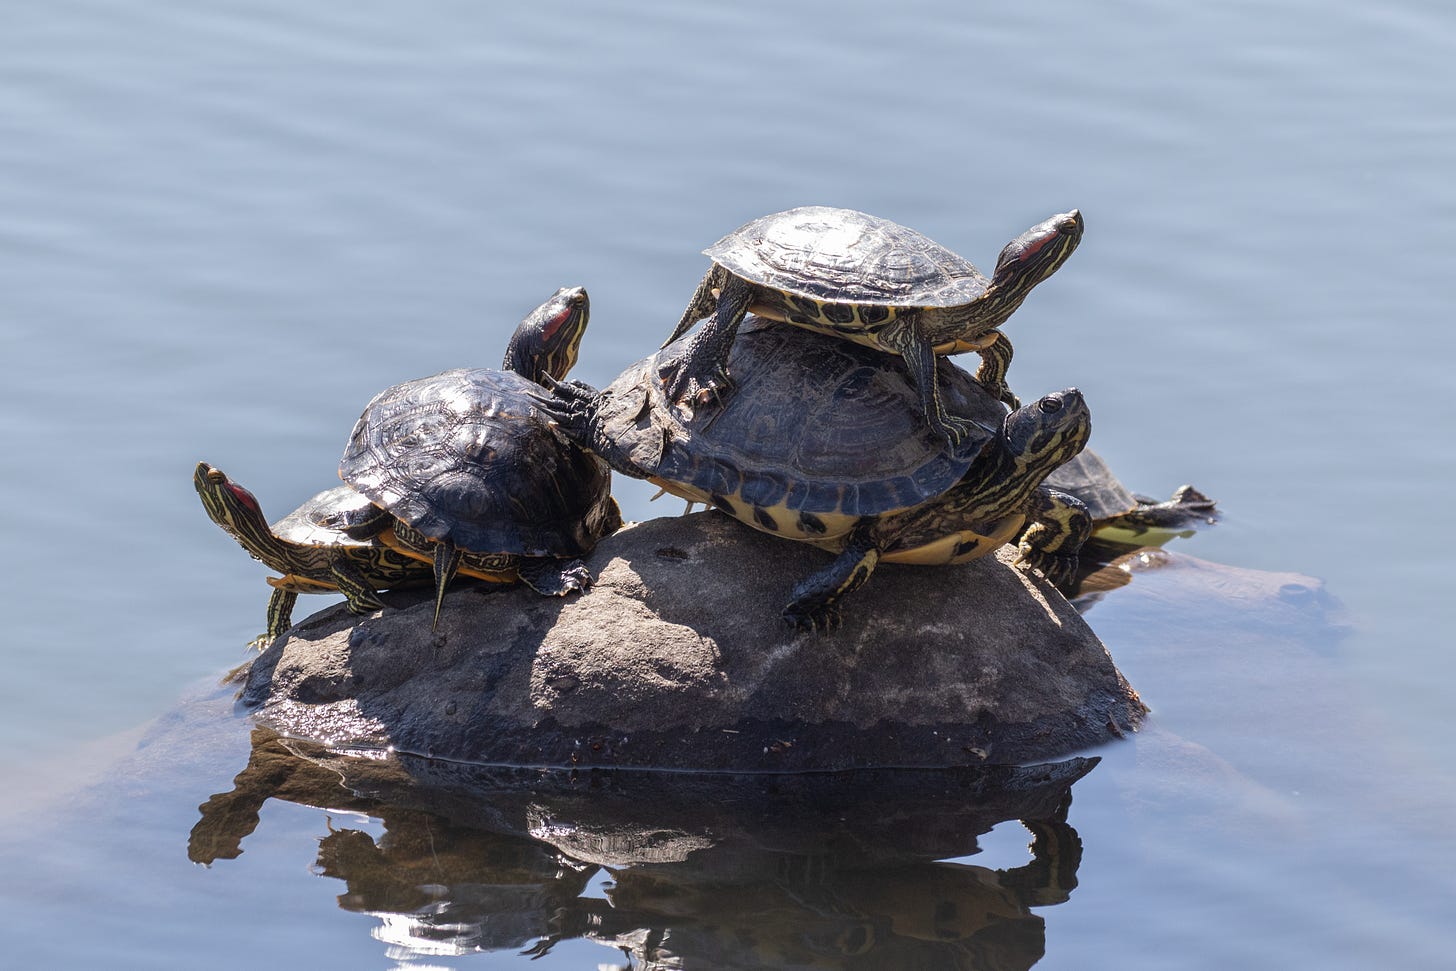 a pile of turtles on a rock, two stacks, one on the left with two small turtles, one on the right with a little turtle atop a big turtle